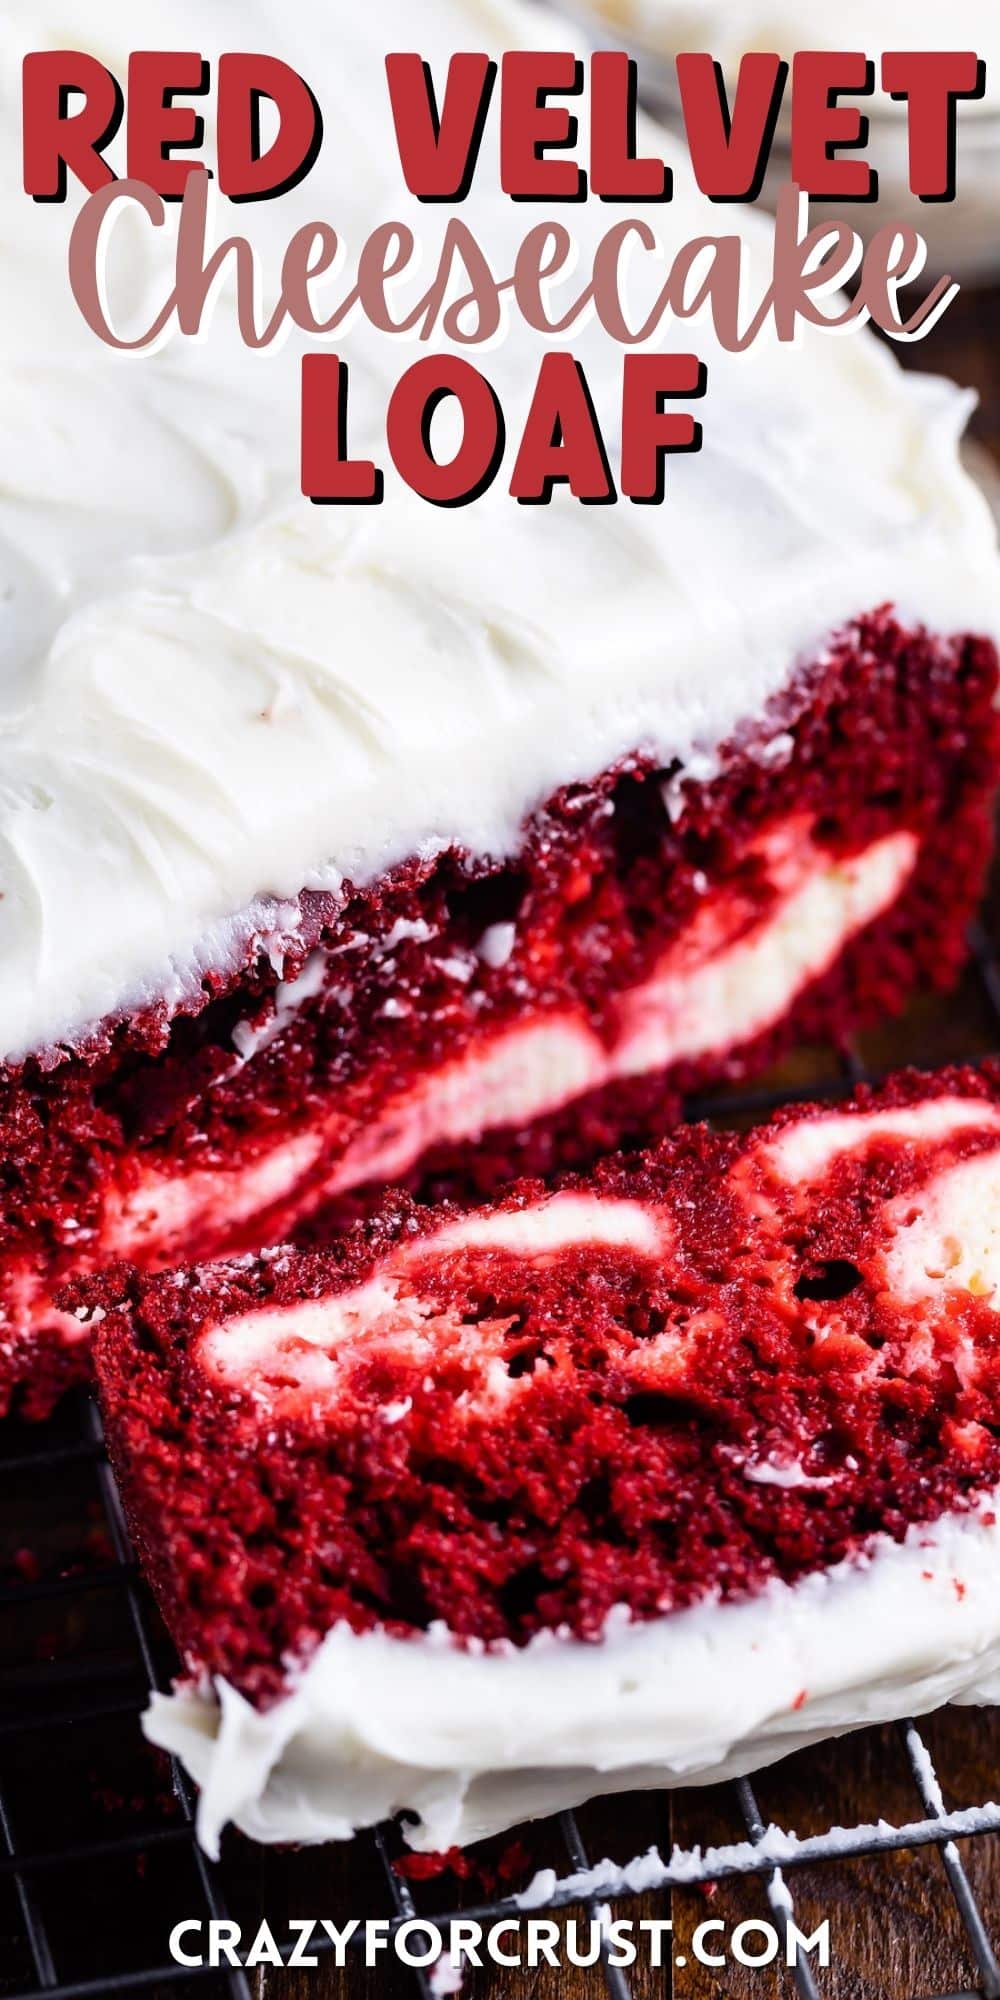 red velvet loaf covered in white frosting with words on the image